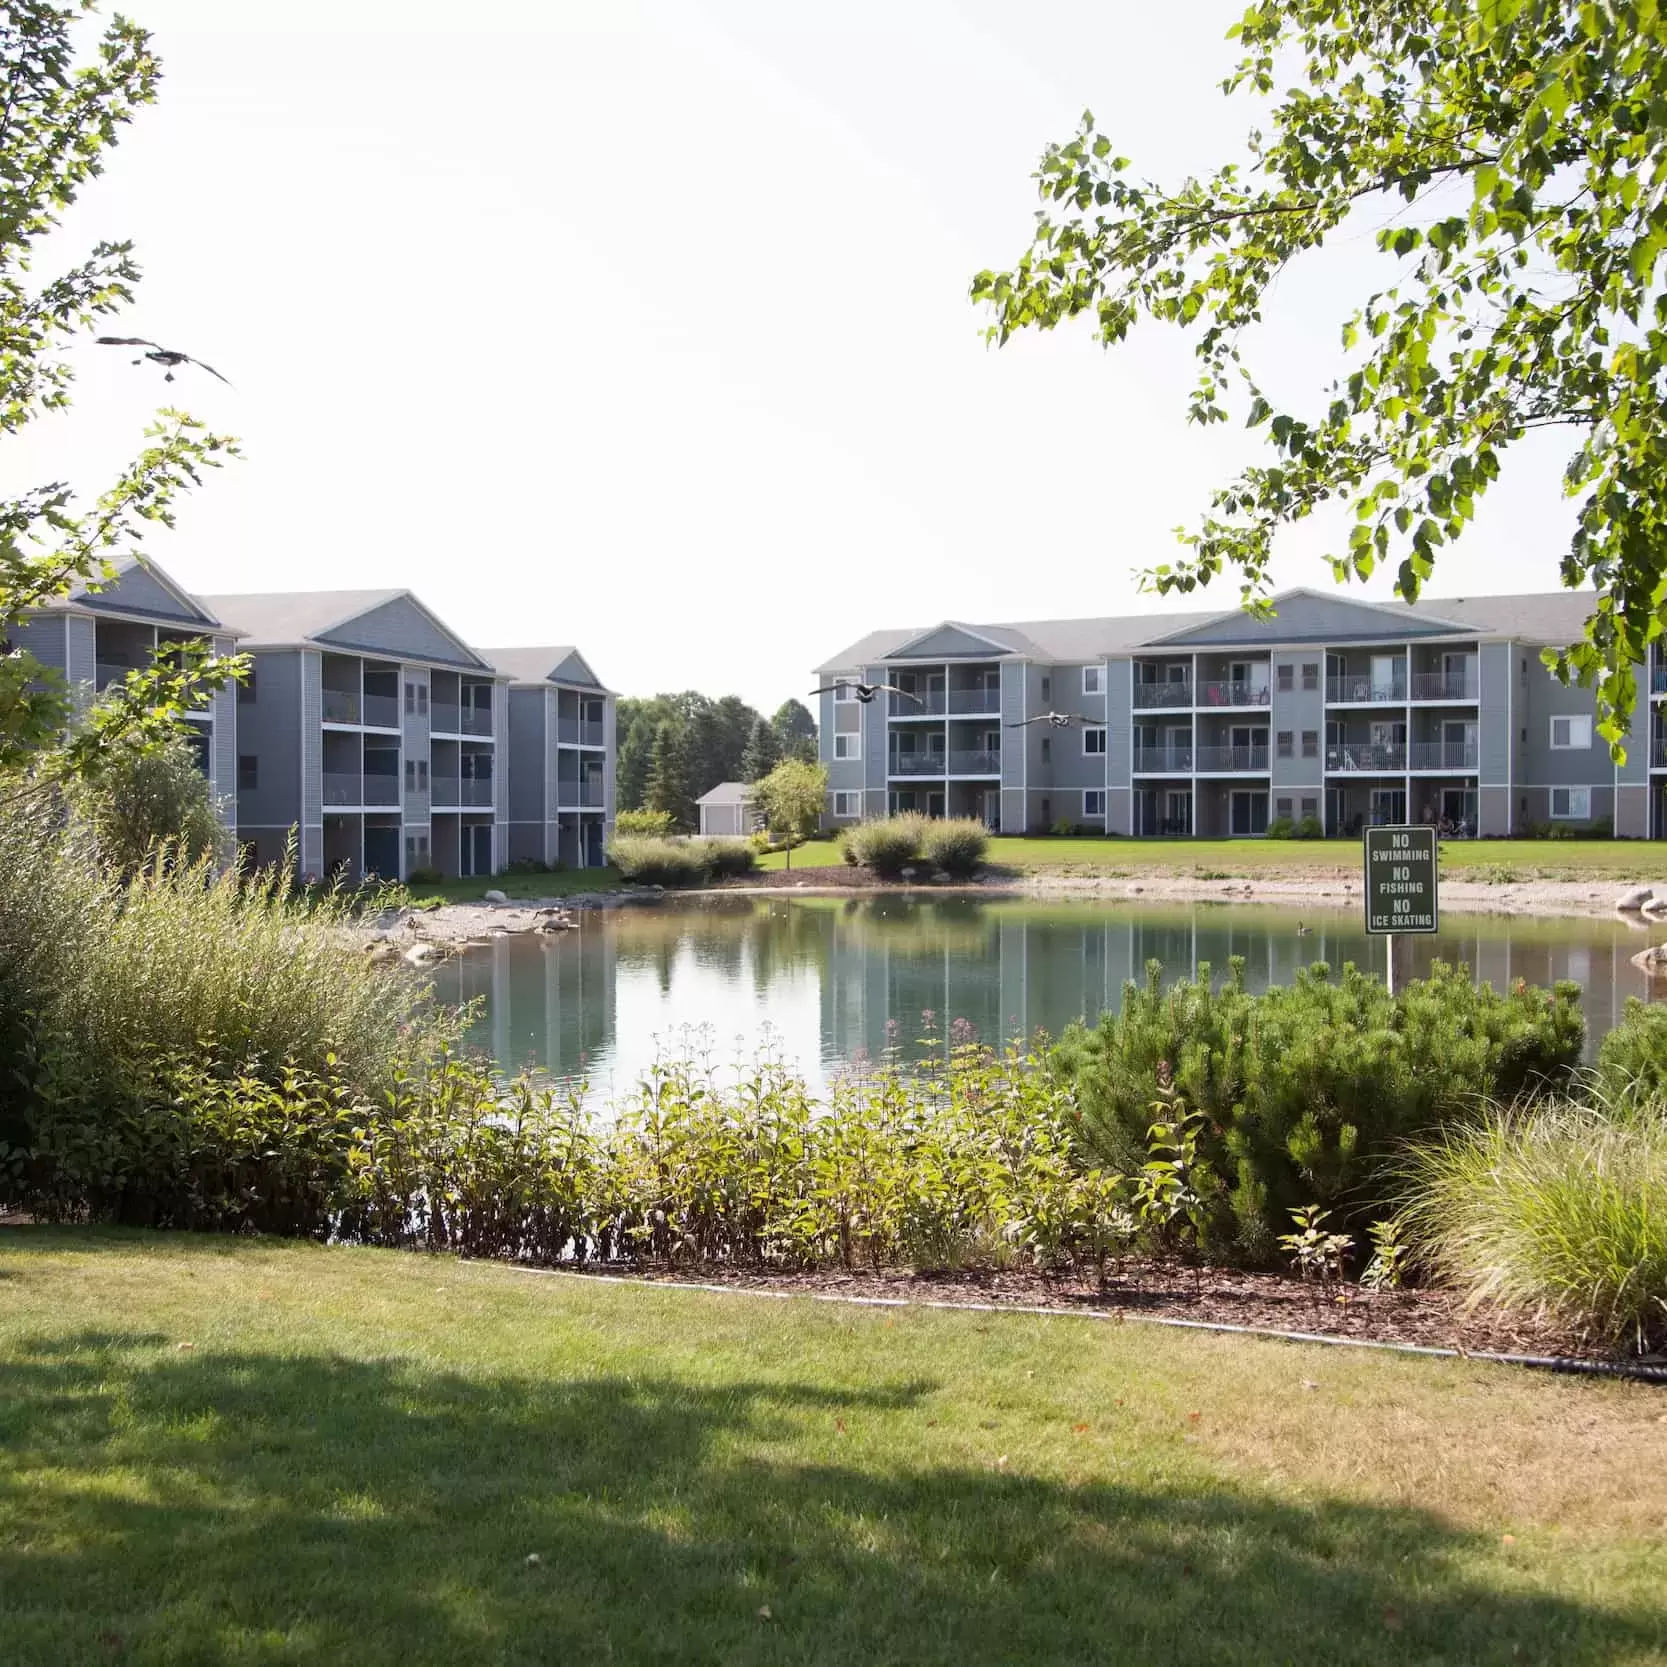 A pond surrounded by landscaped areas makes a lovely view in front of the Liv Arbors apartment buildings.